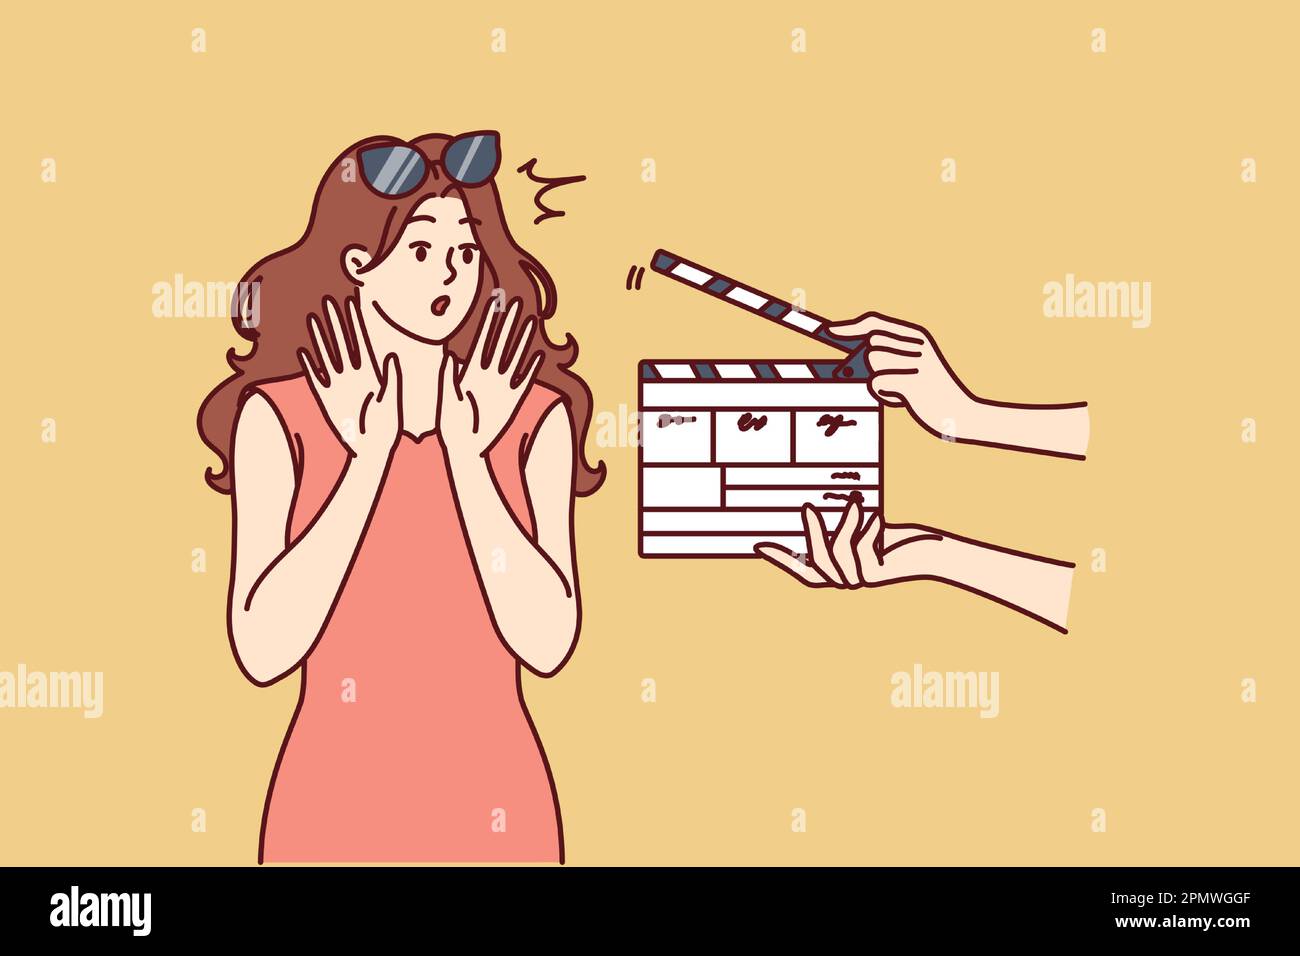 Woman movie star is embarrassed sees clapboard passing casting call for role in popular series or tv show. Movie star girl waving hands, not wanting to film or answer questions from reporters  Stock Vector